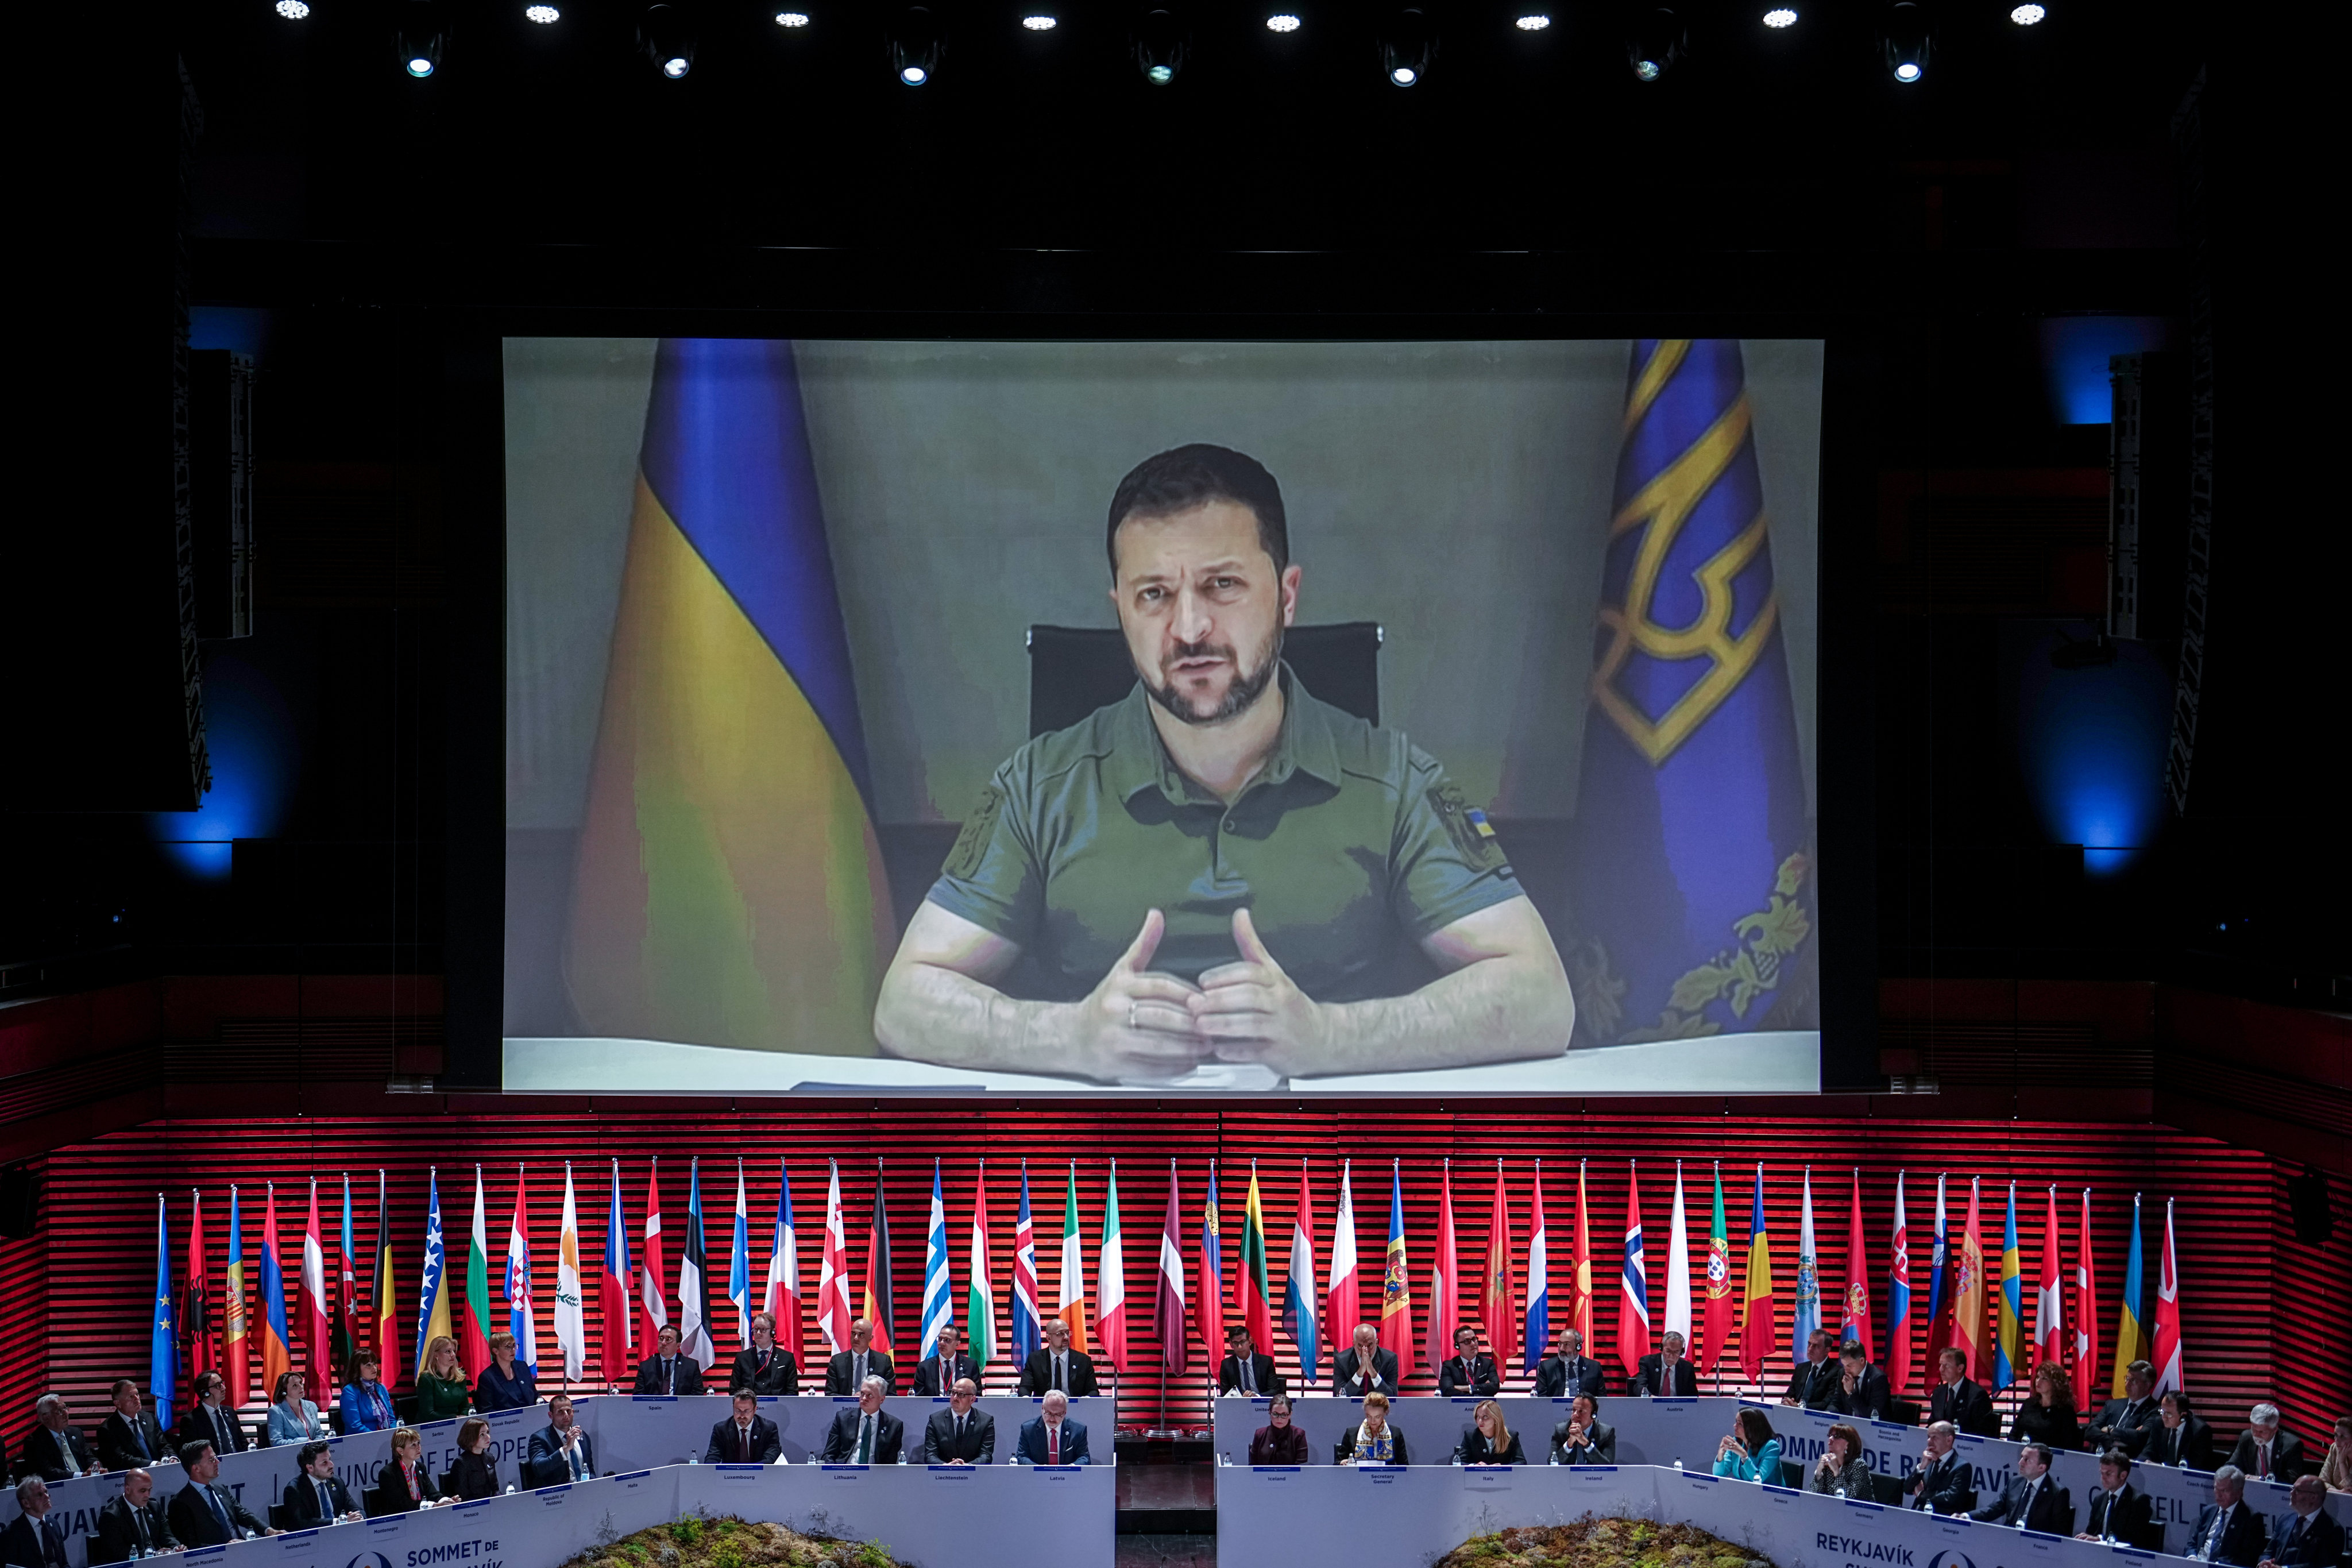 Ukraine’s President Volodymyr Zelensky addresses the opening ceremony of the Council of Europe summit in Reykjavik, Iceland via videolink on Tuesday. Photo: dpa